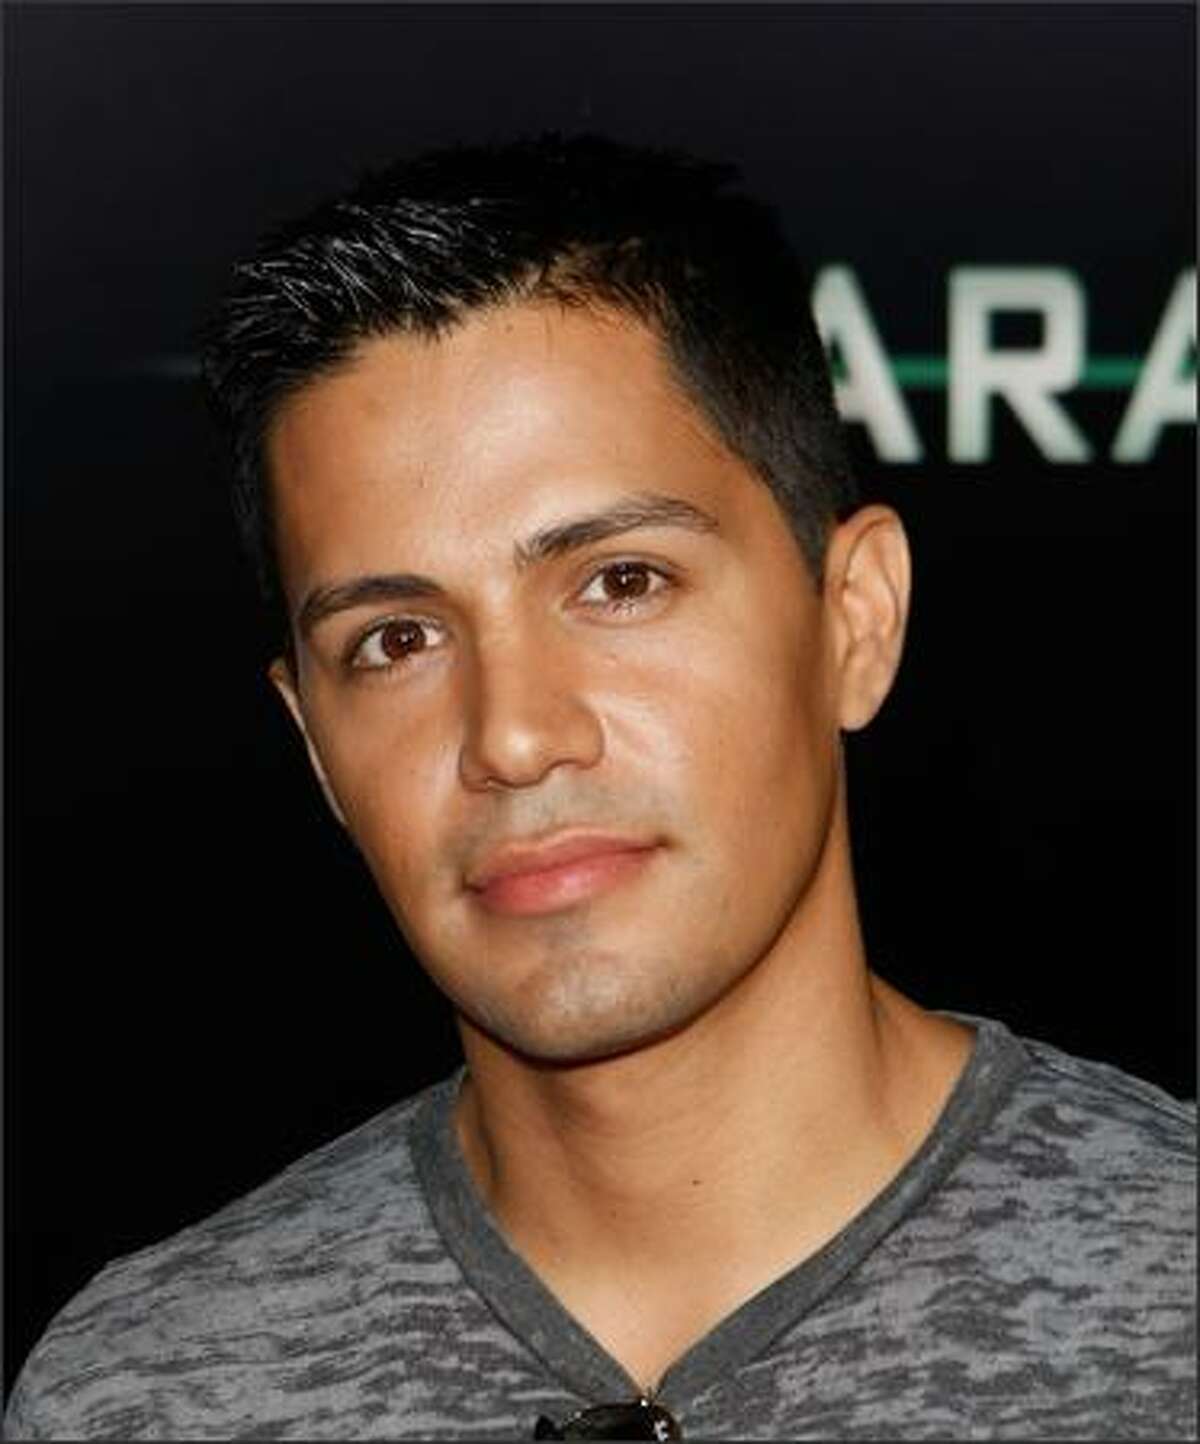 Actor Jay Hernandez arrives at the premiere of Screen Gems' "Quarantine" at Knott's Scary Farm on Thursday in Buena Park, Calif.